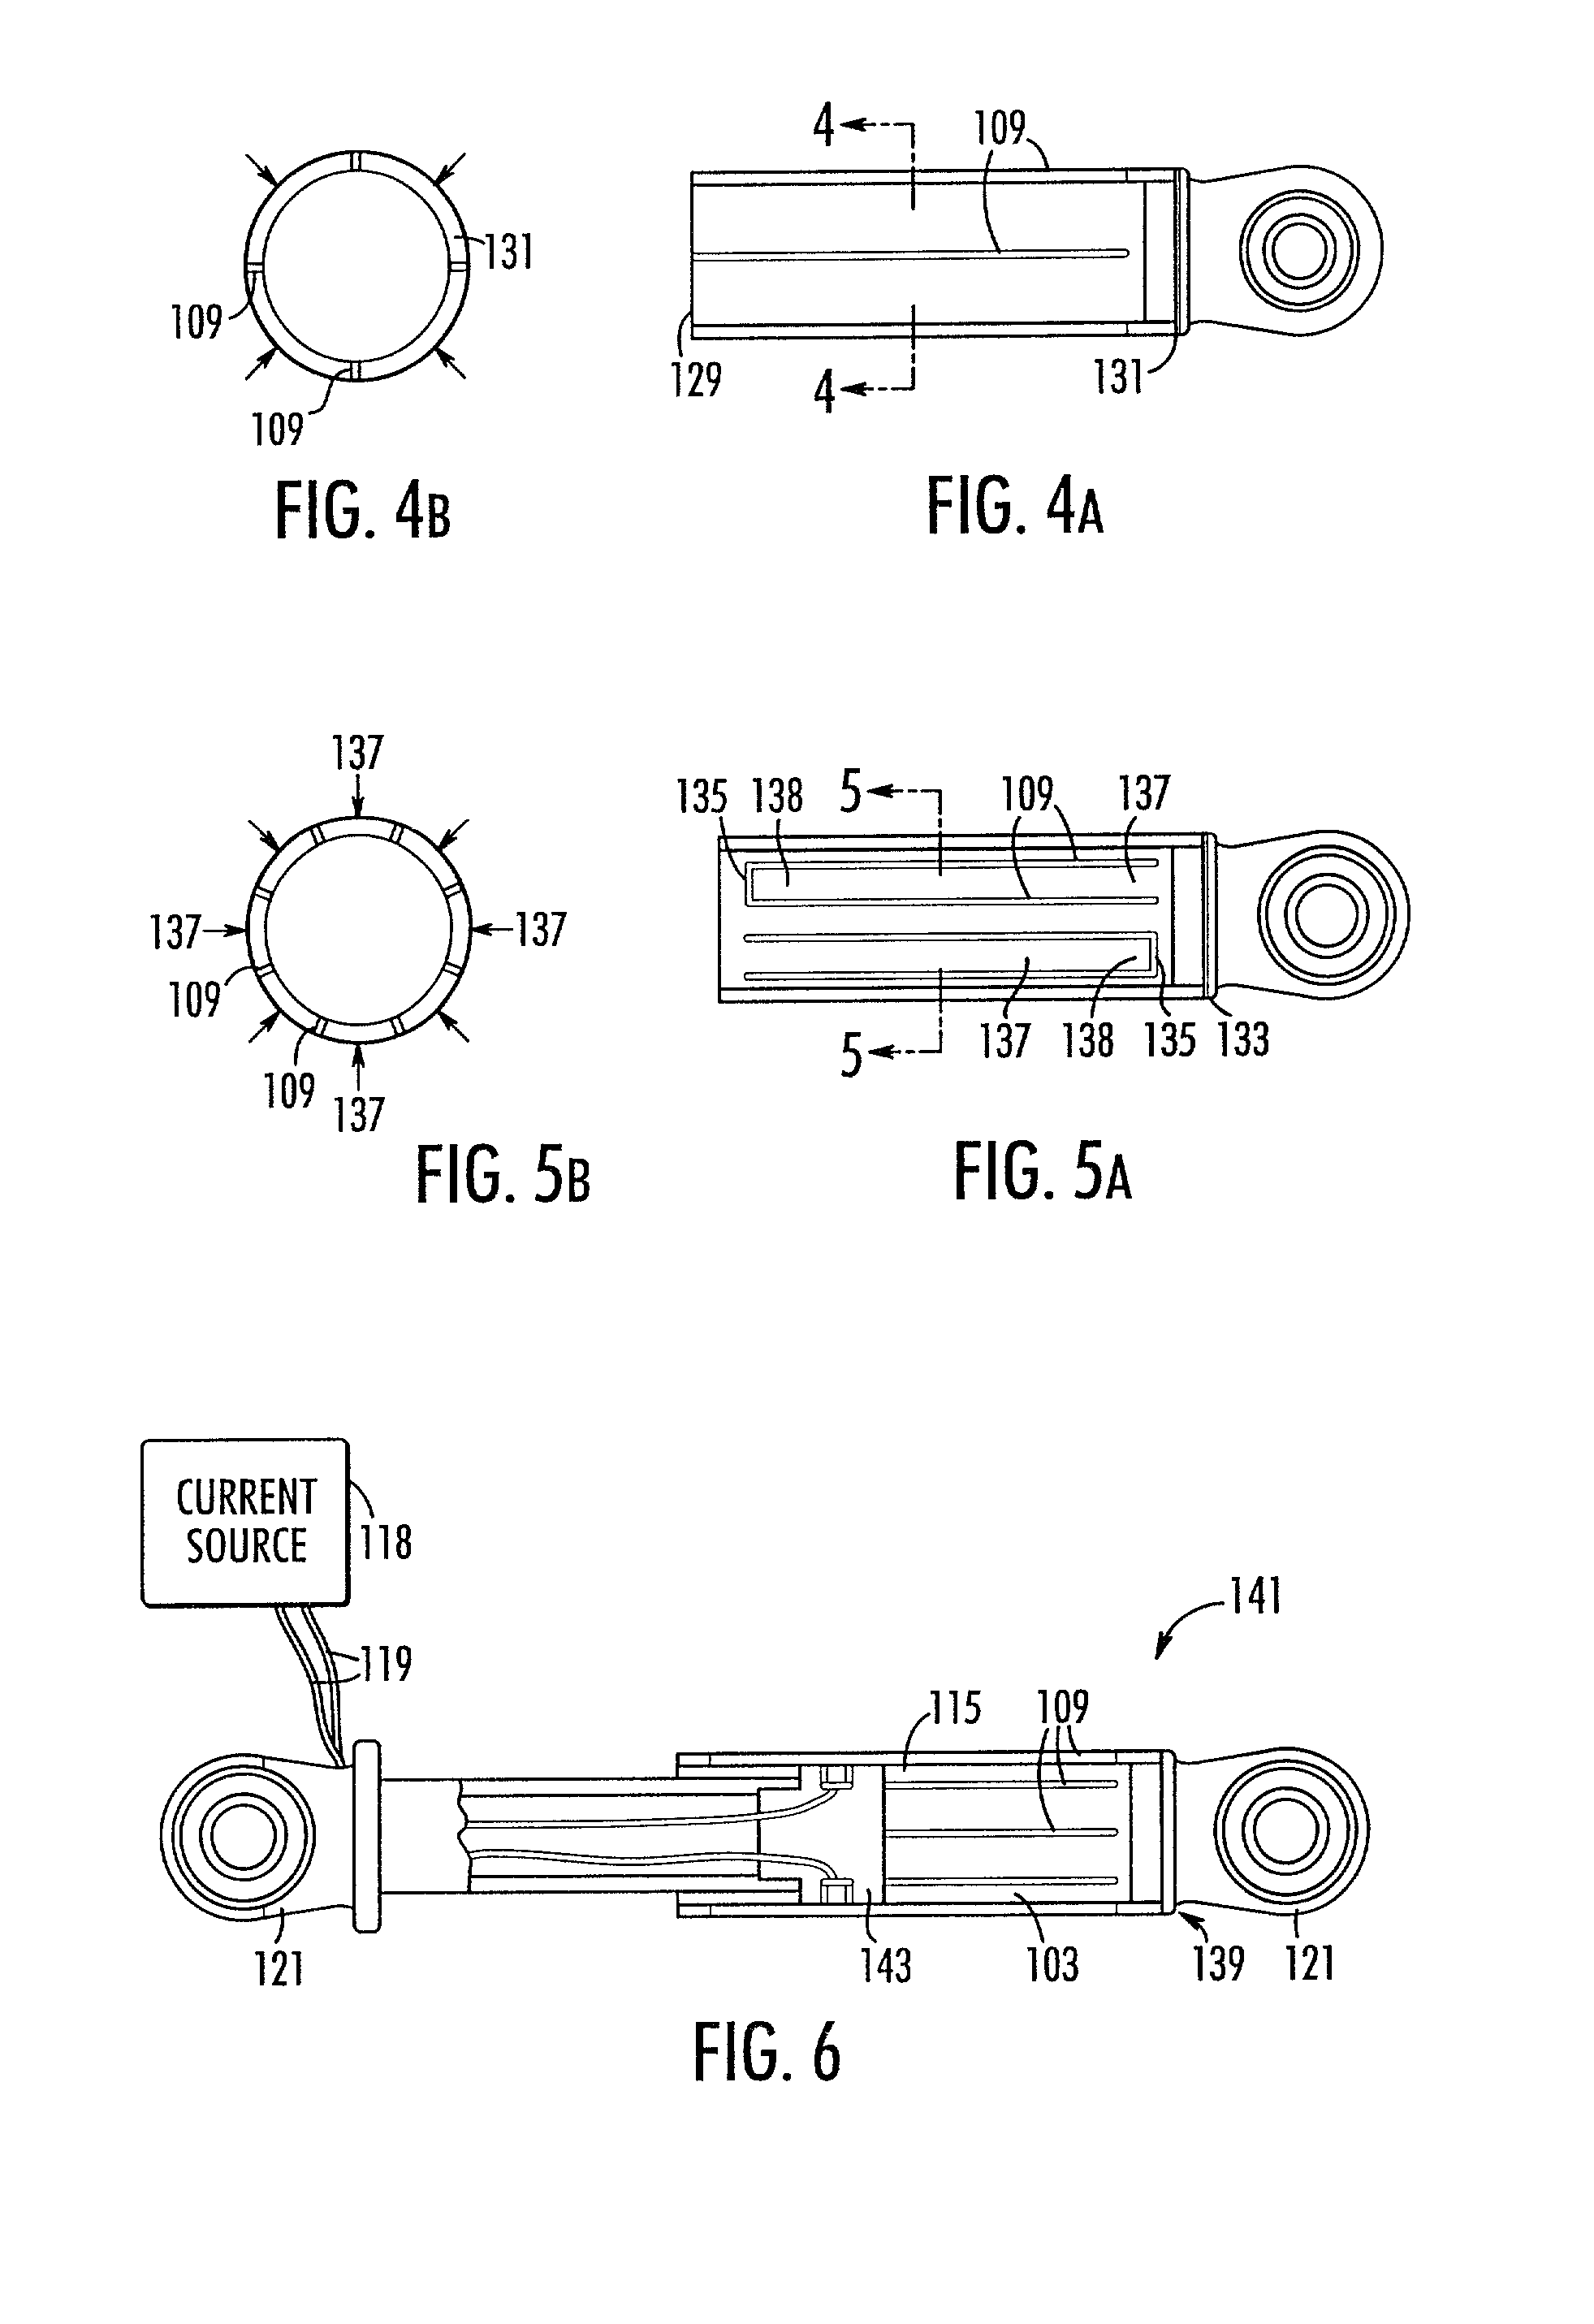 System comprising magnetically actuated motion control device